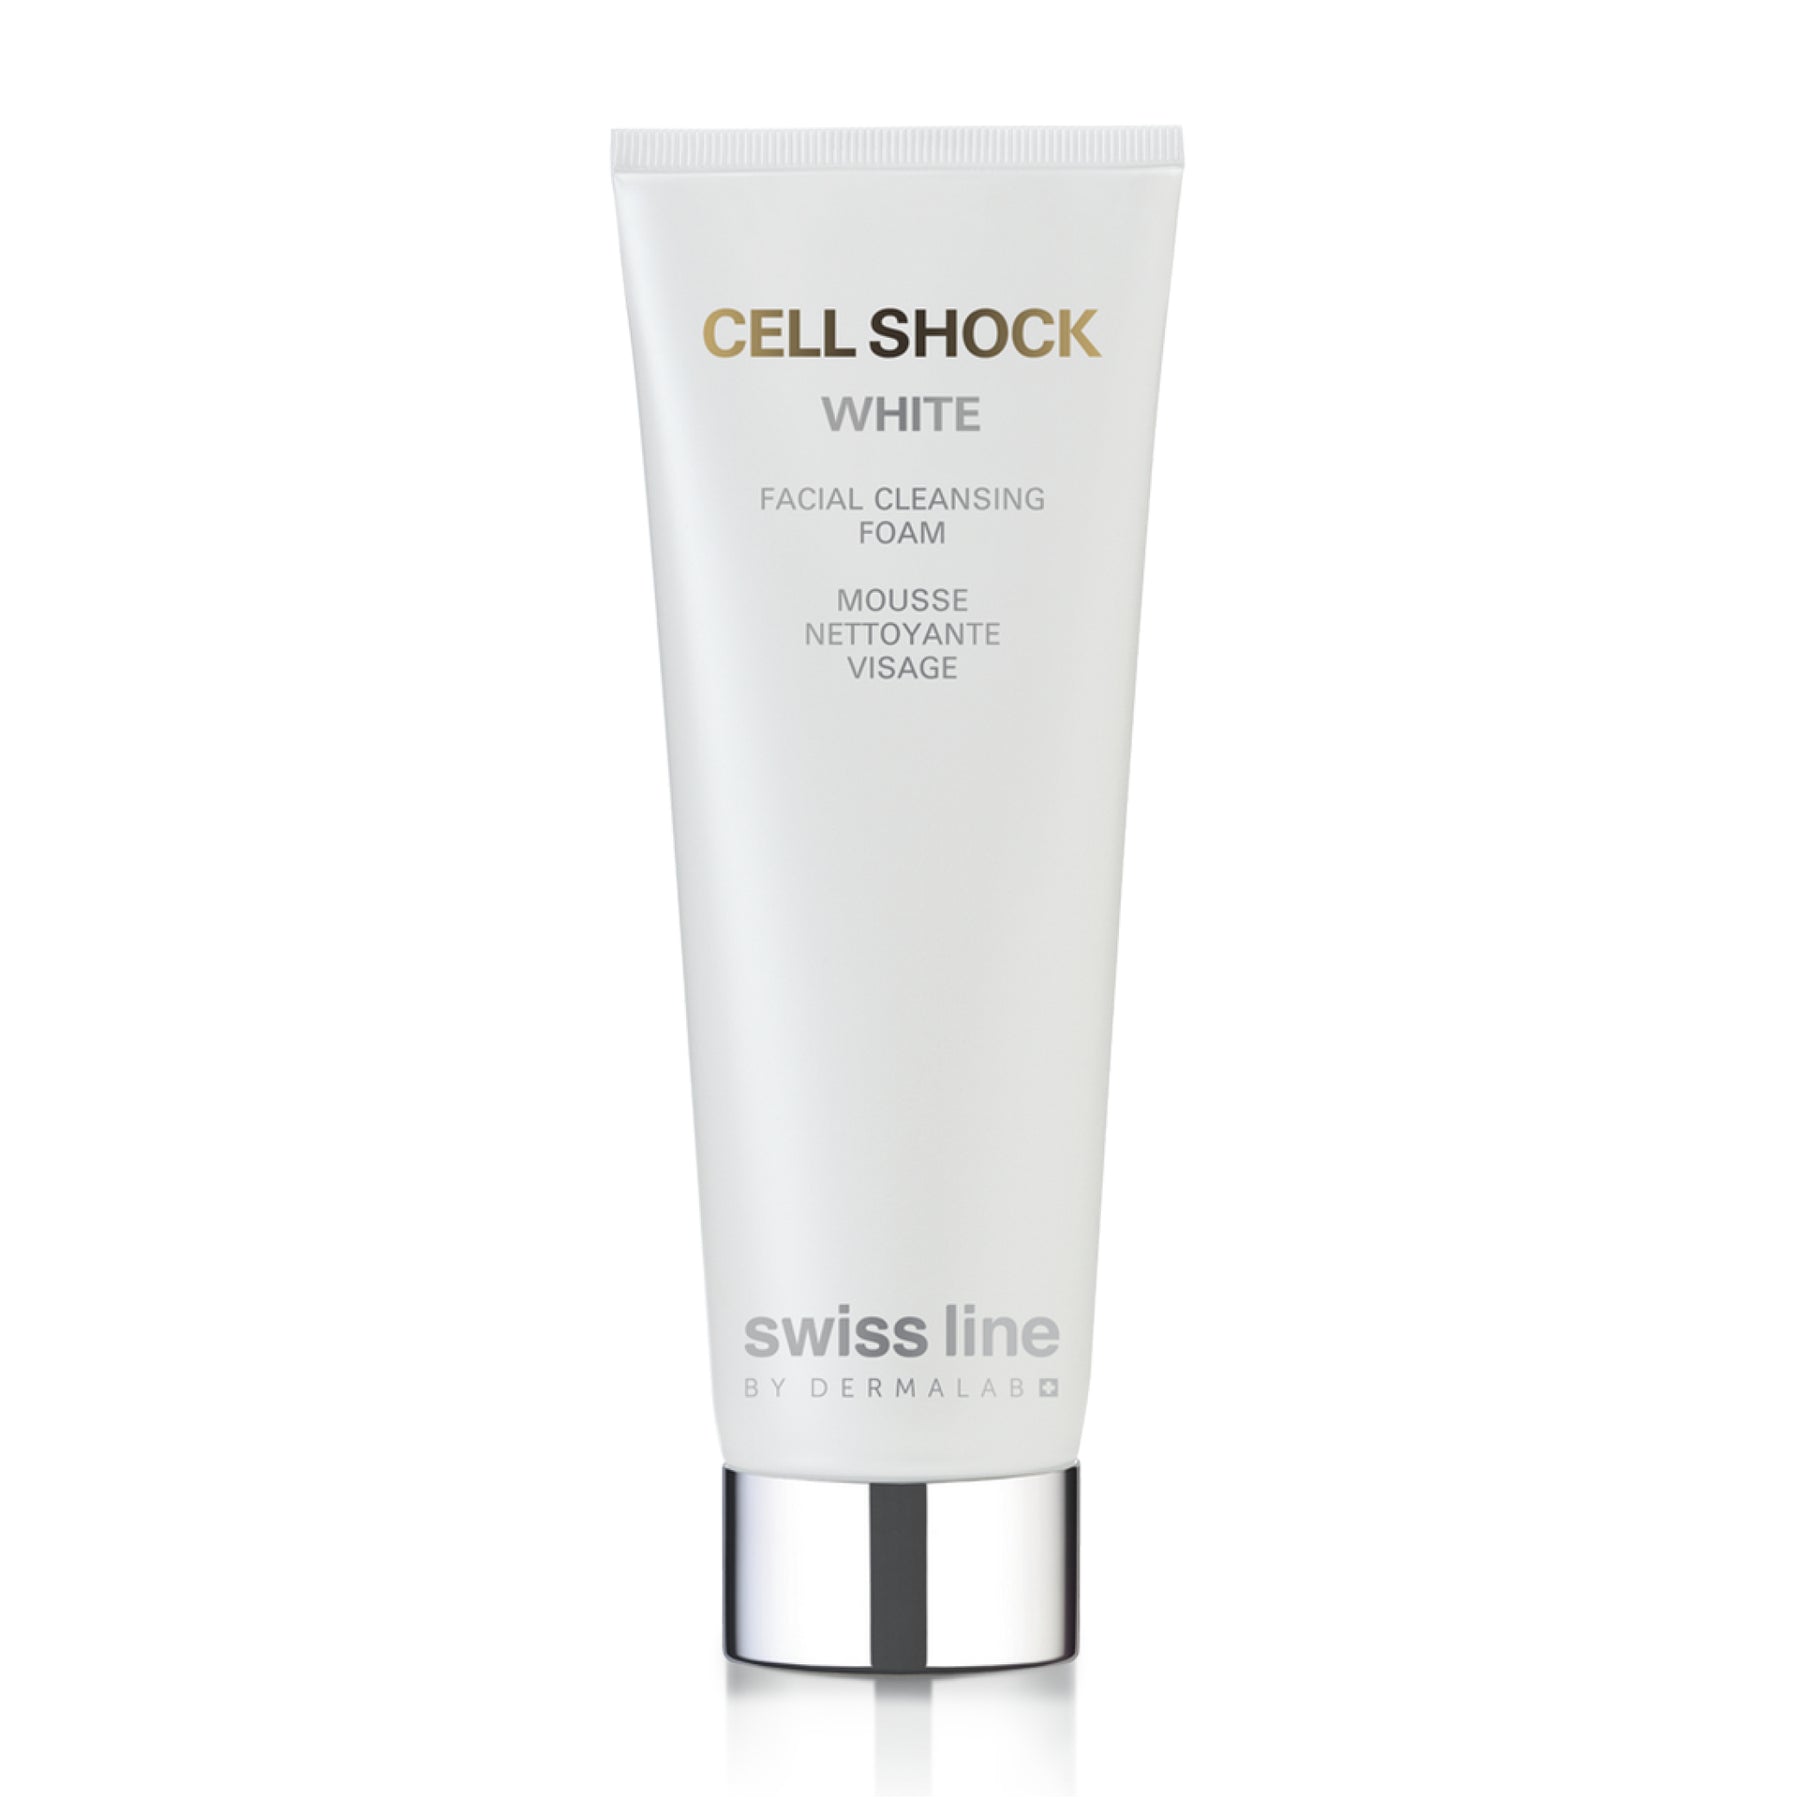 CELL SHOCK WHITE -Mousse Nettoyante